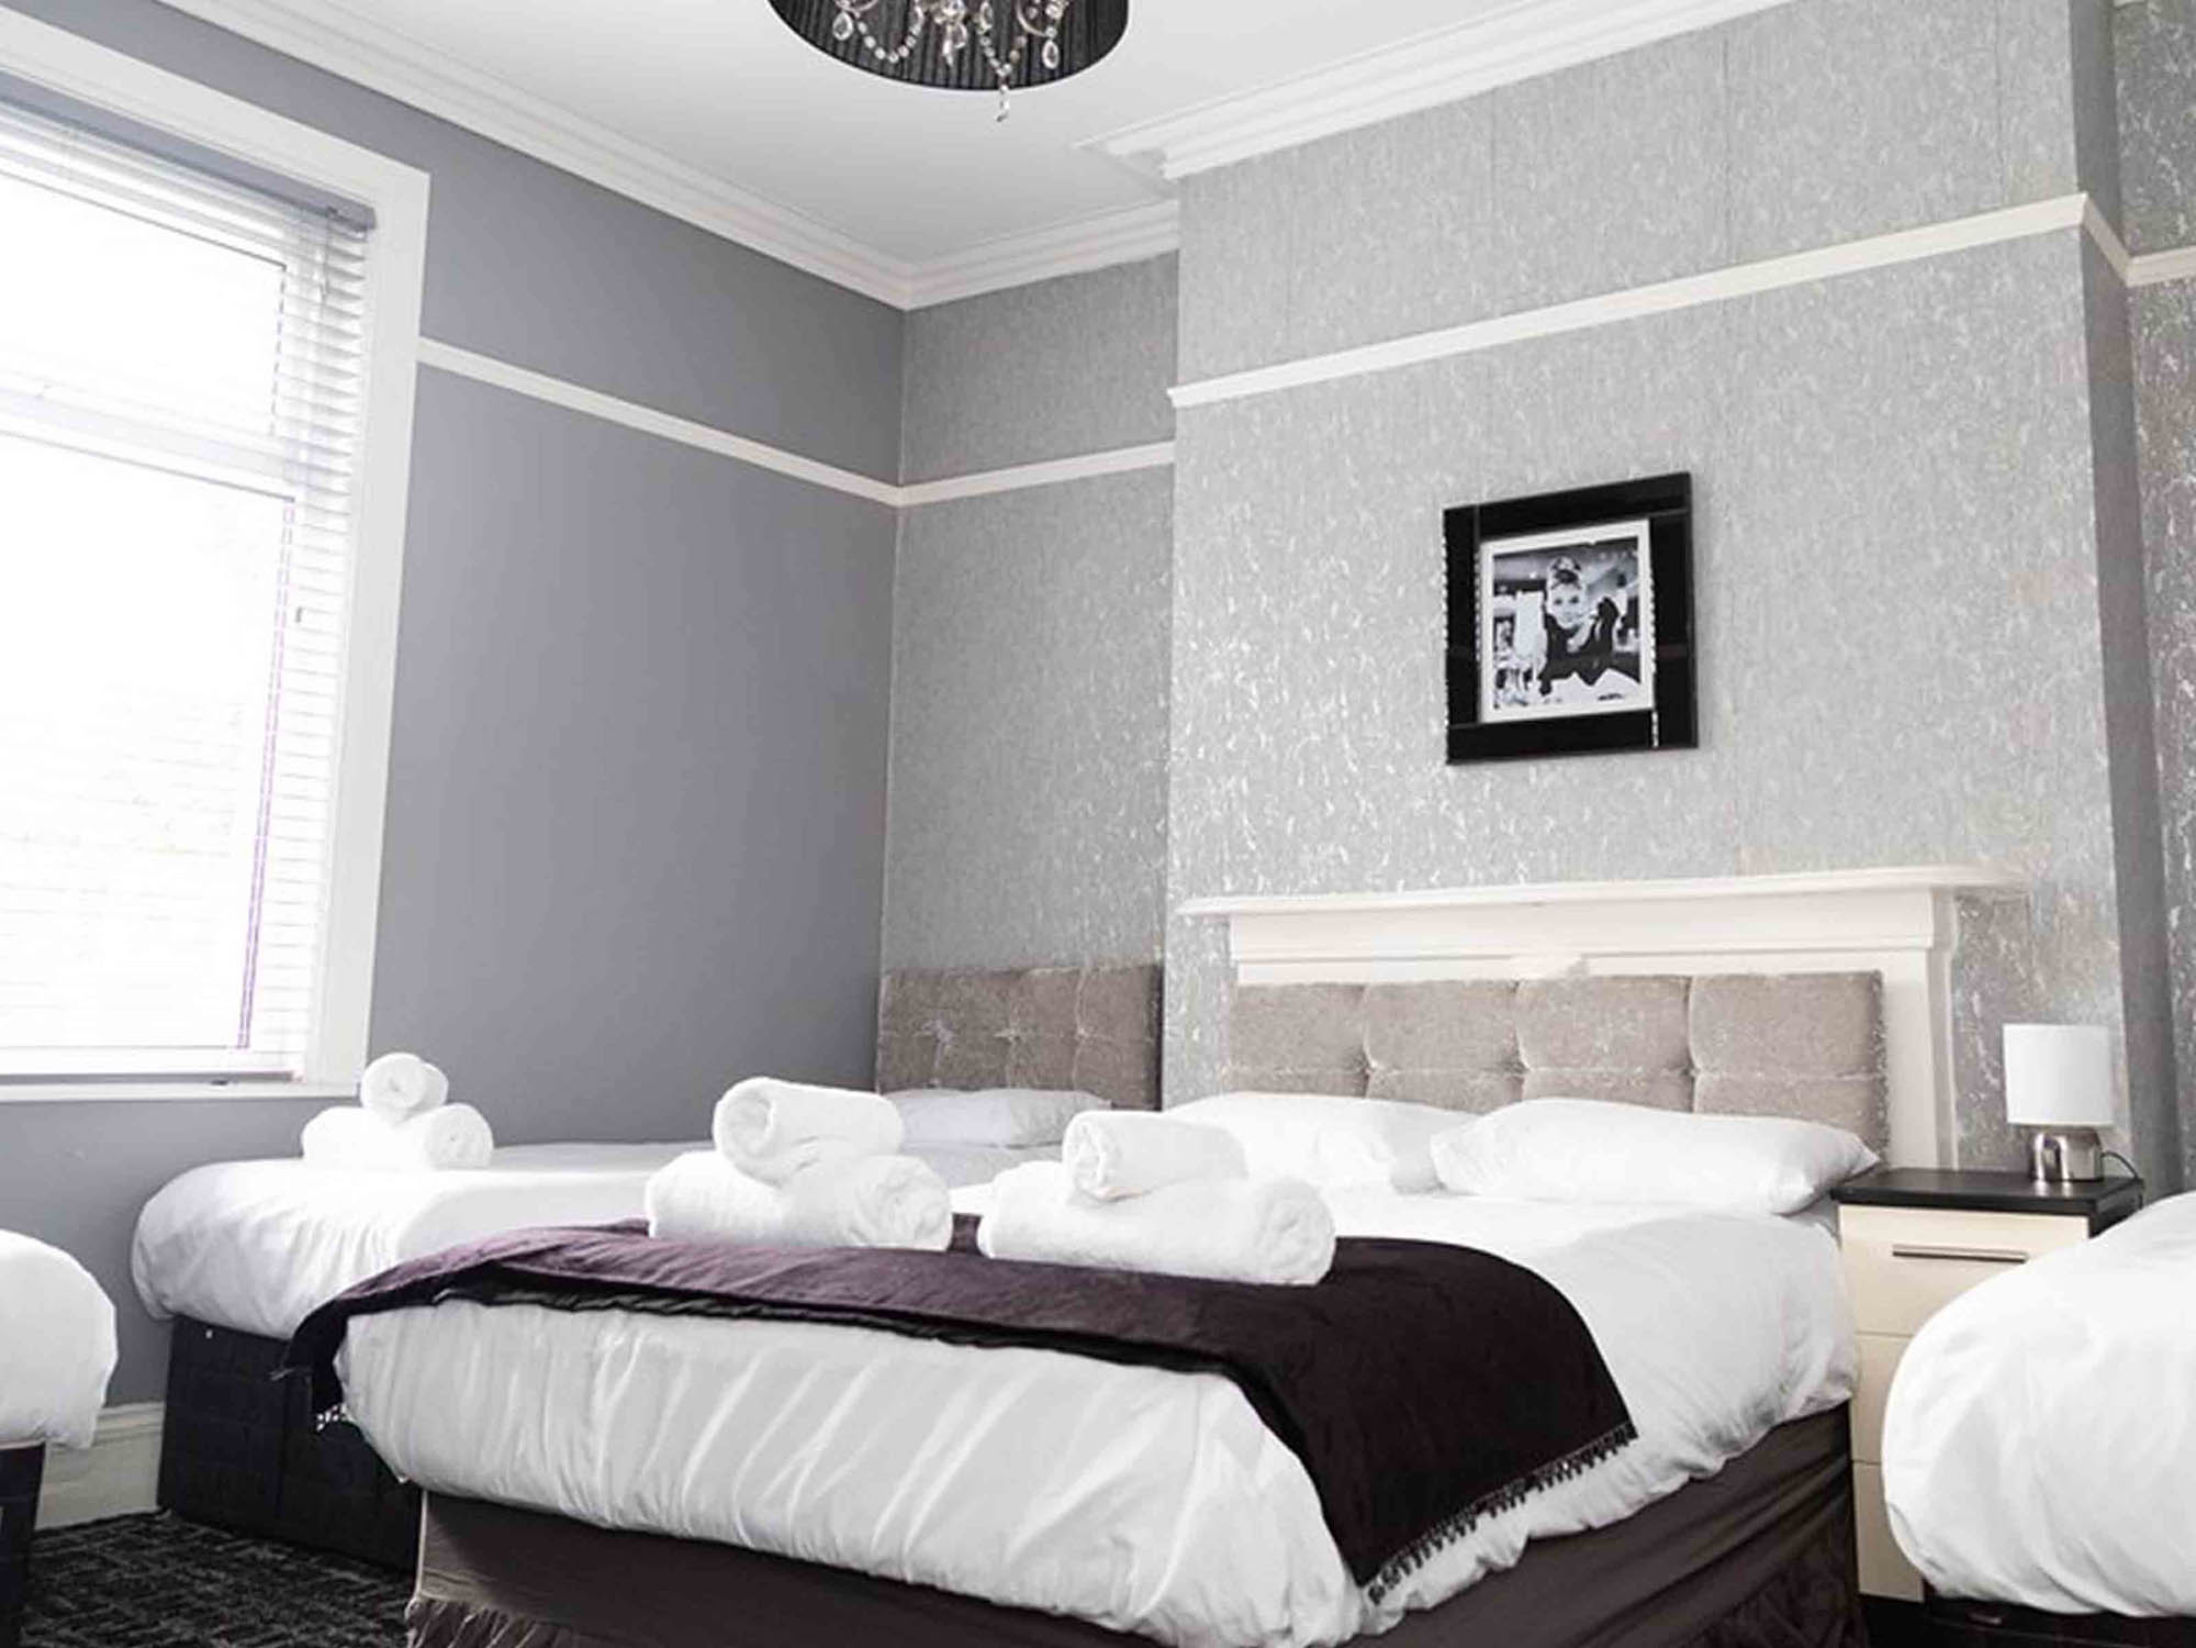 Best Hotels in Liverpool - Hotel Anfield